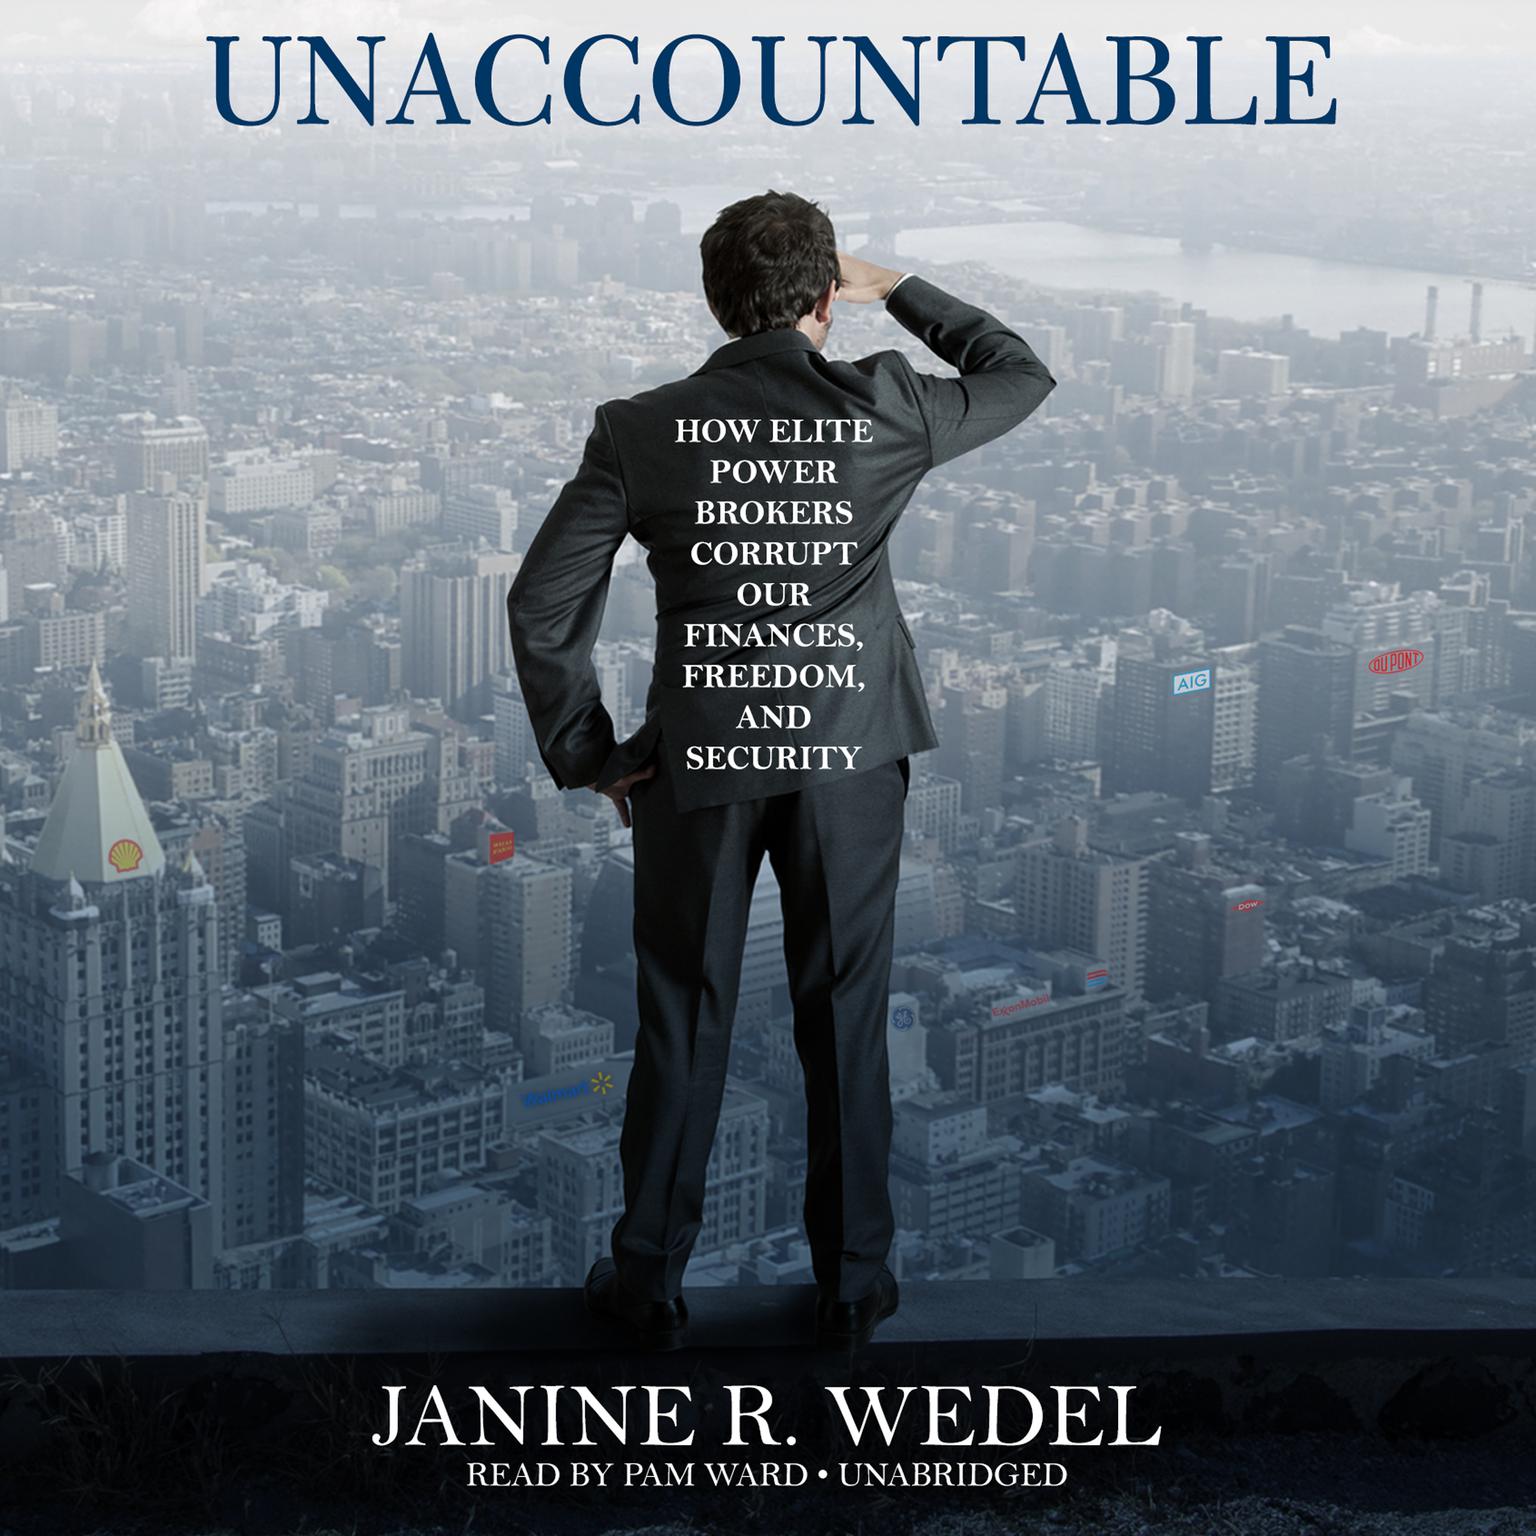 Unaccountable: How Elite Power Brokers Corrupt Our Finances, Freedom, and Security Audiobook, by Janine R. Wedel